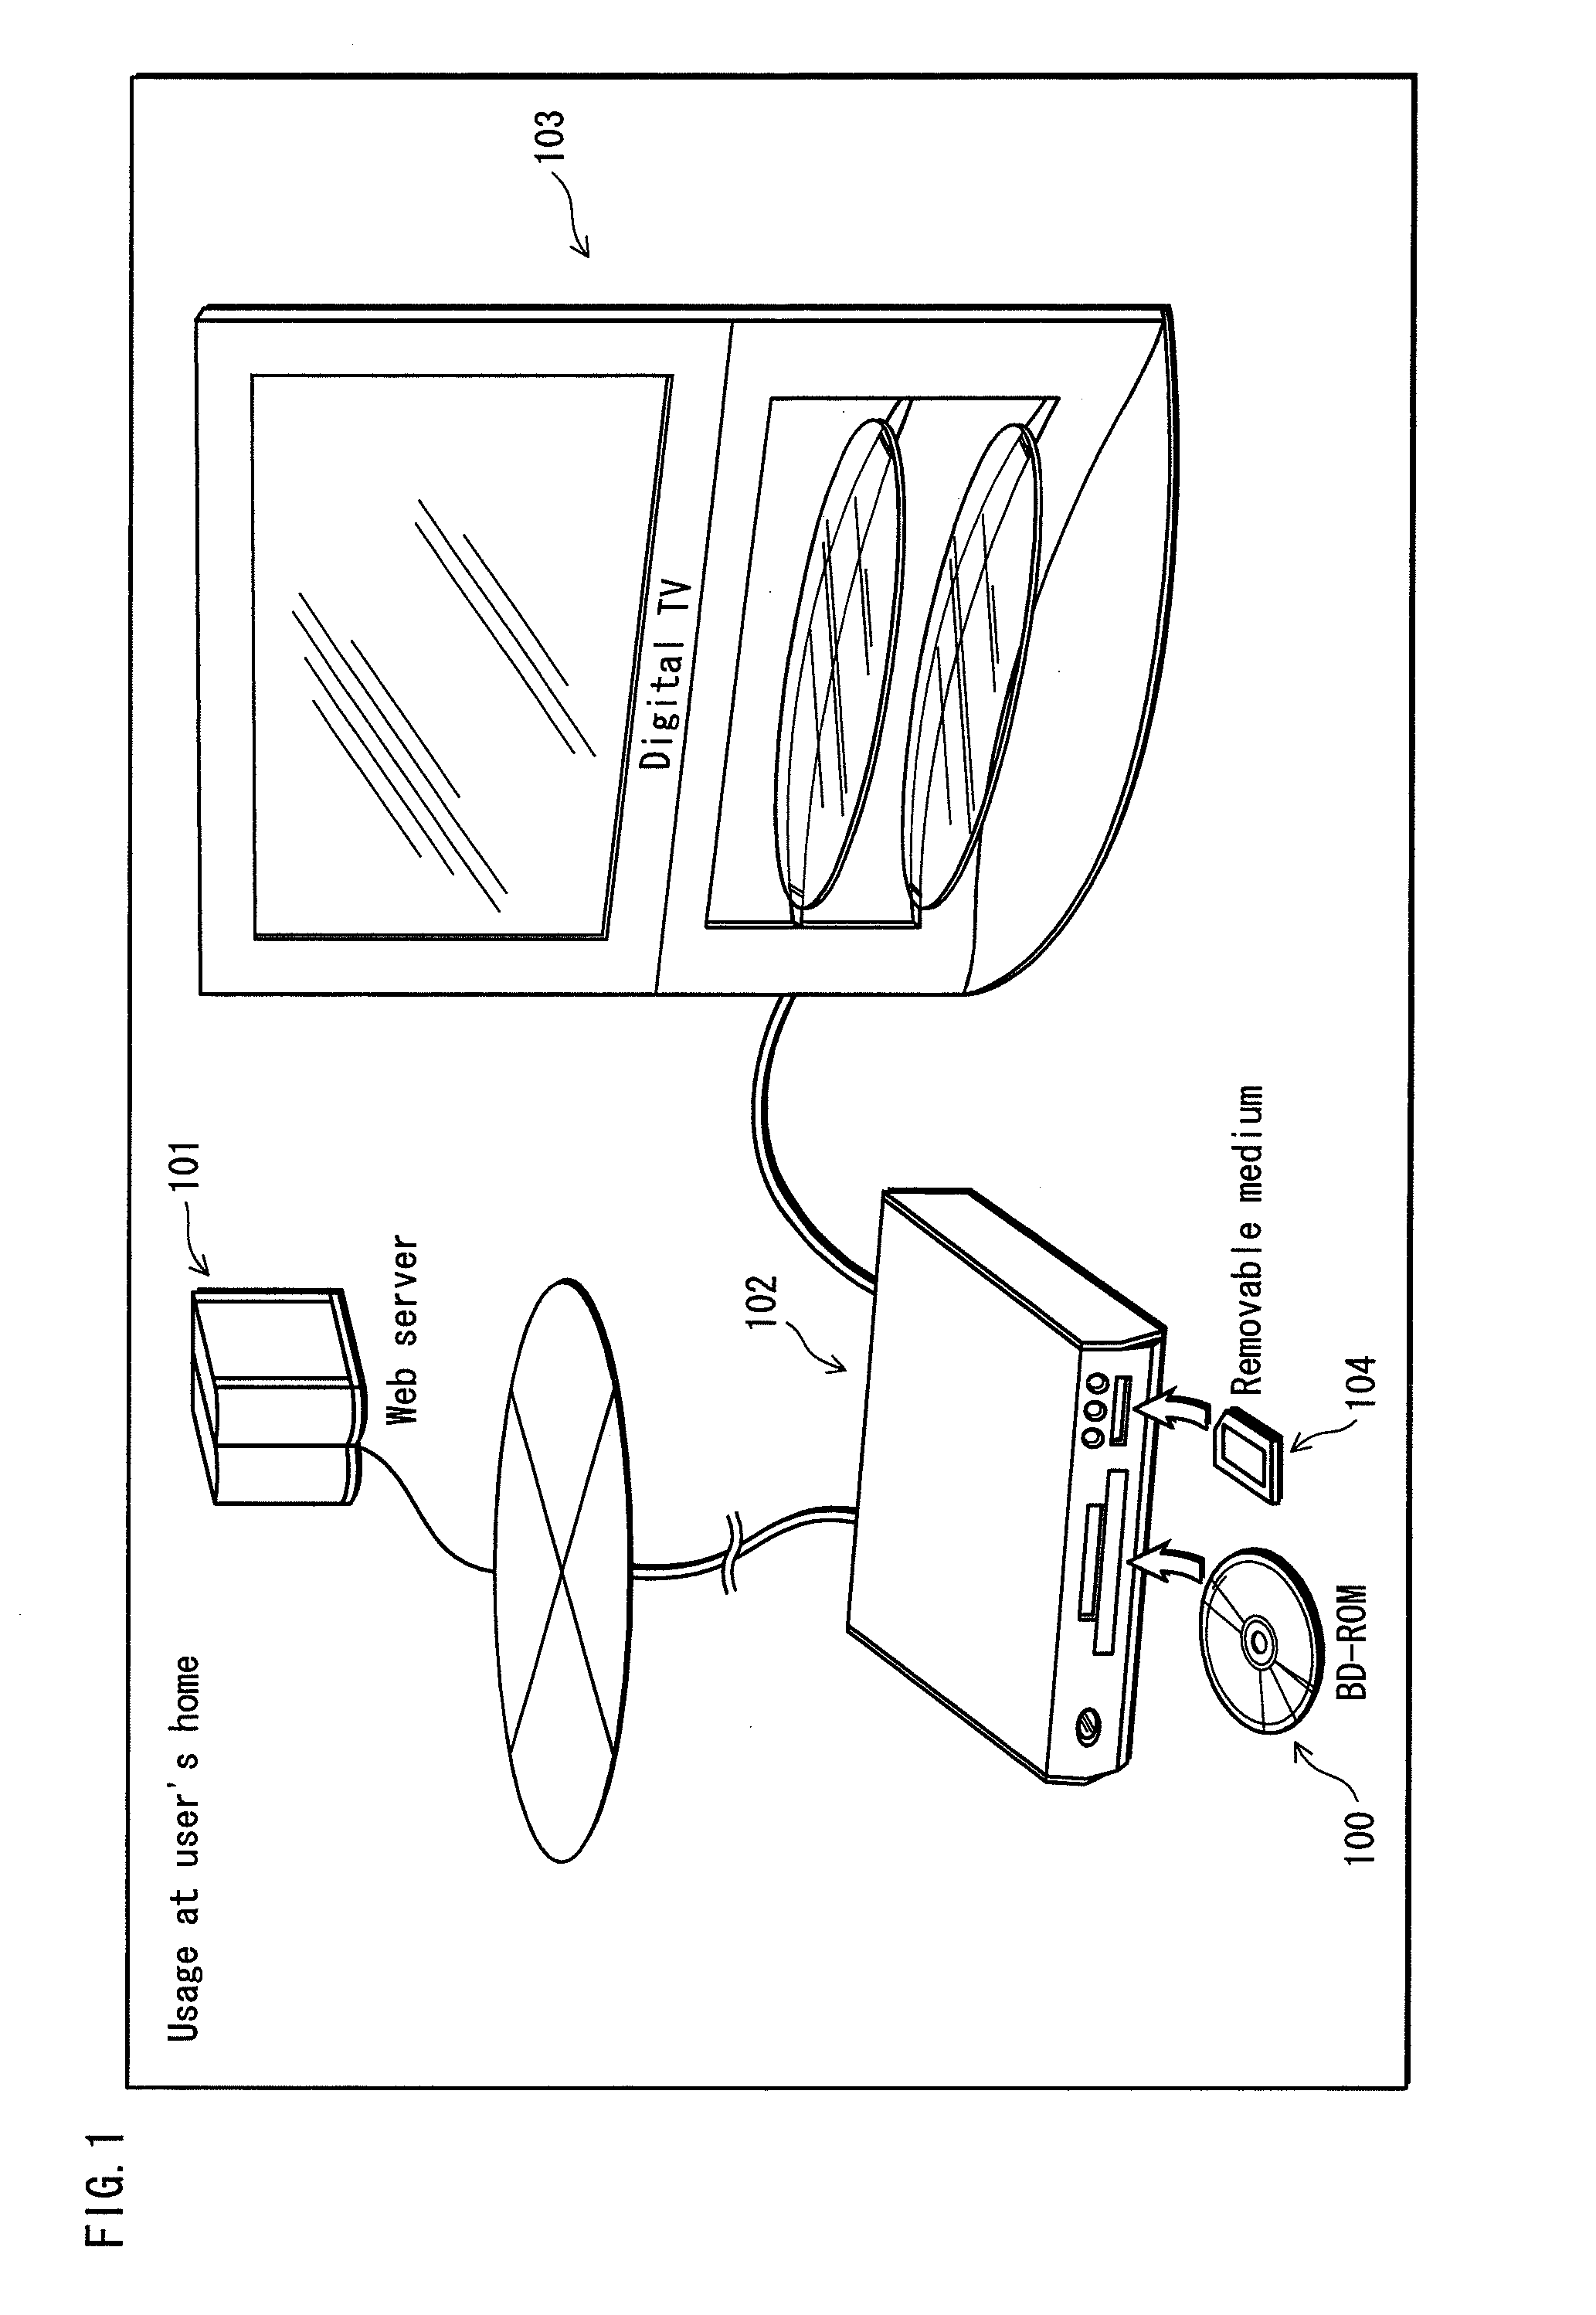 Reproducing apparatus, system lsi, and initialization method